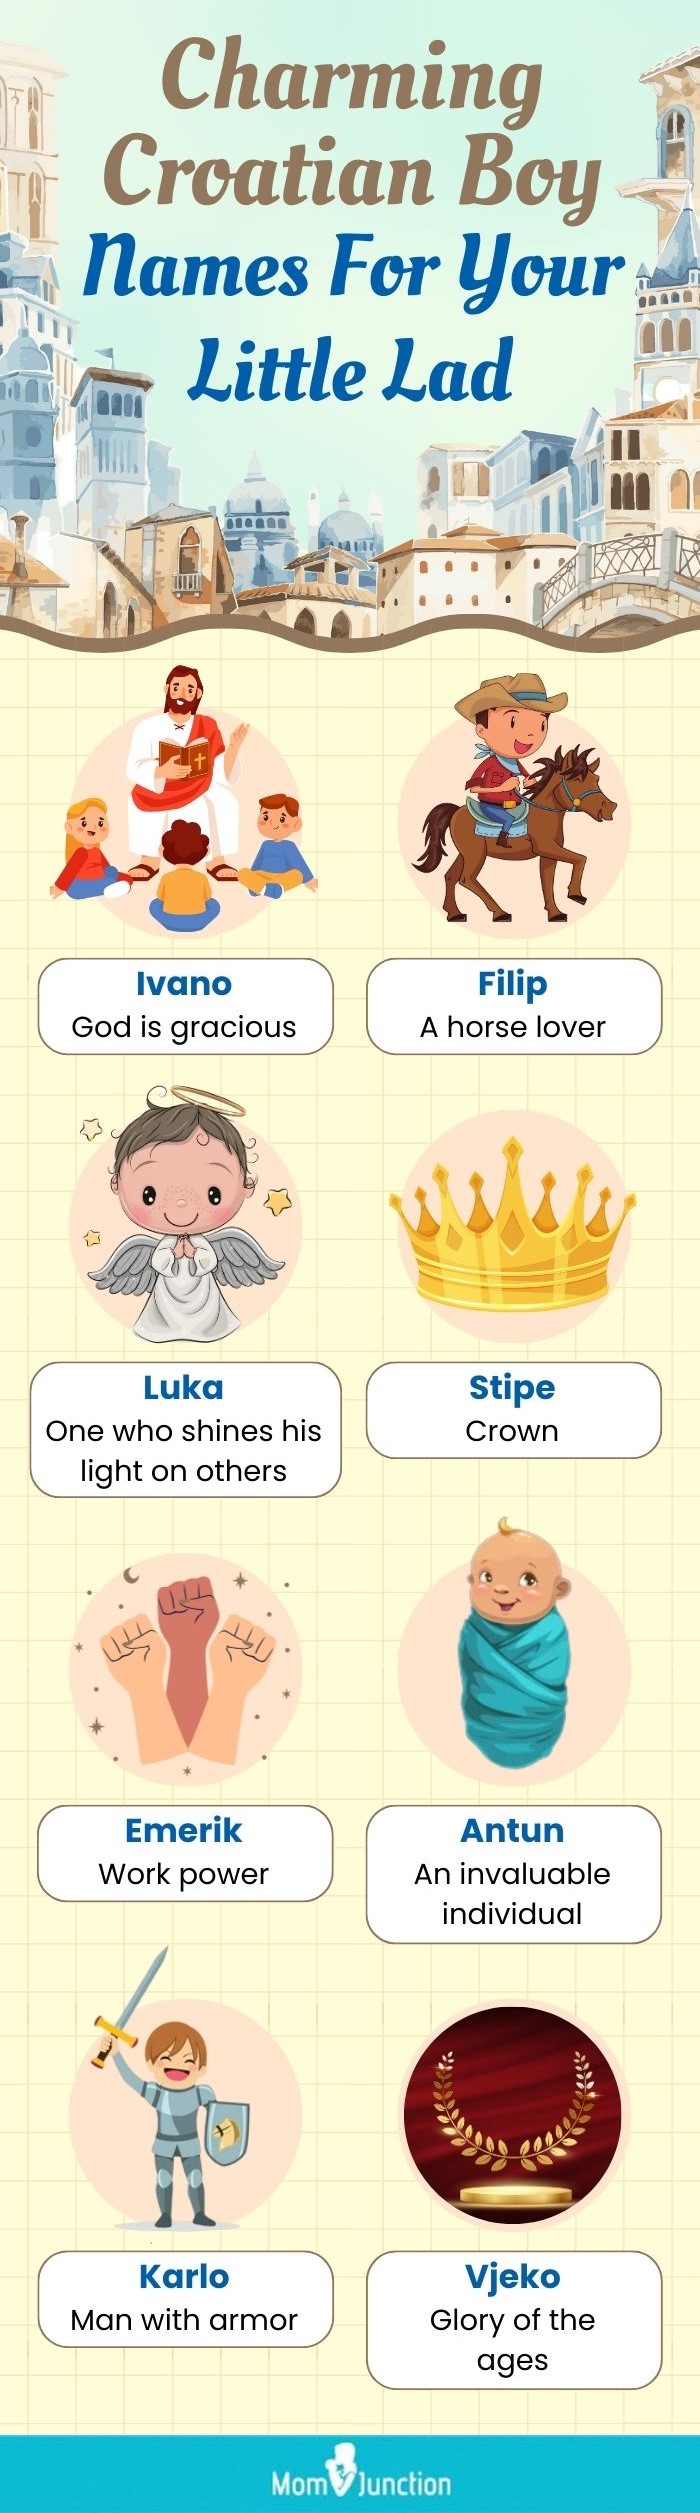 charming croatian boy names for your little lad (infographic)